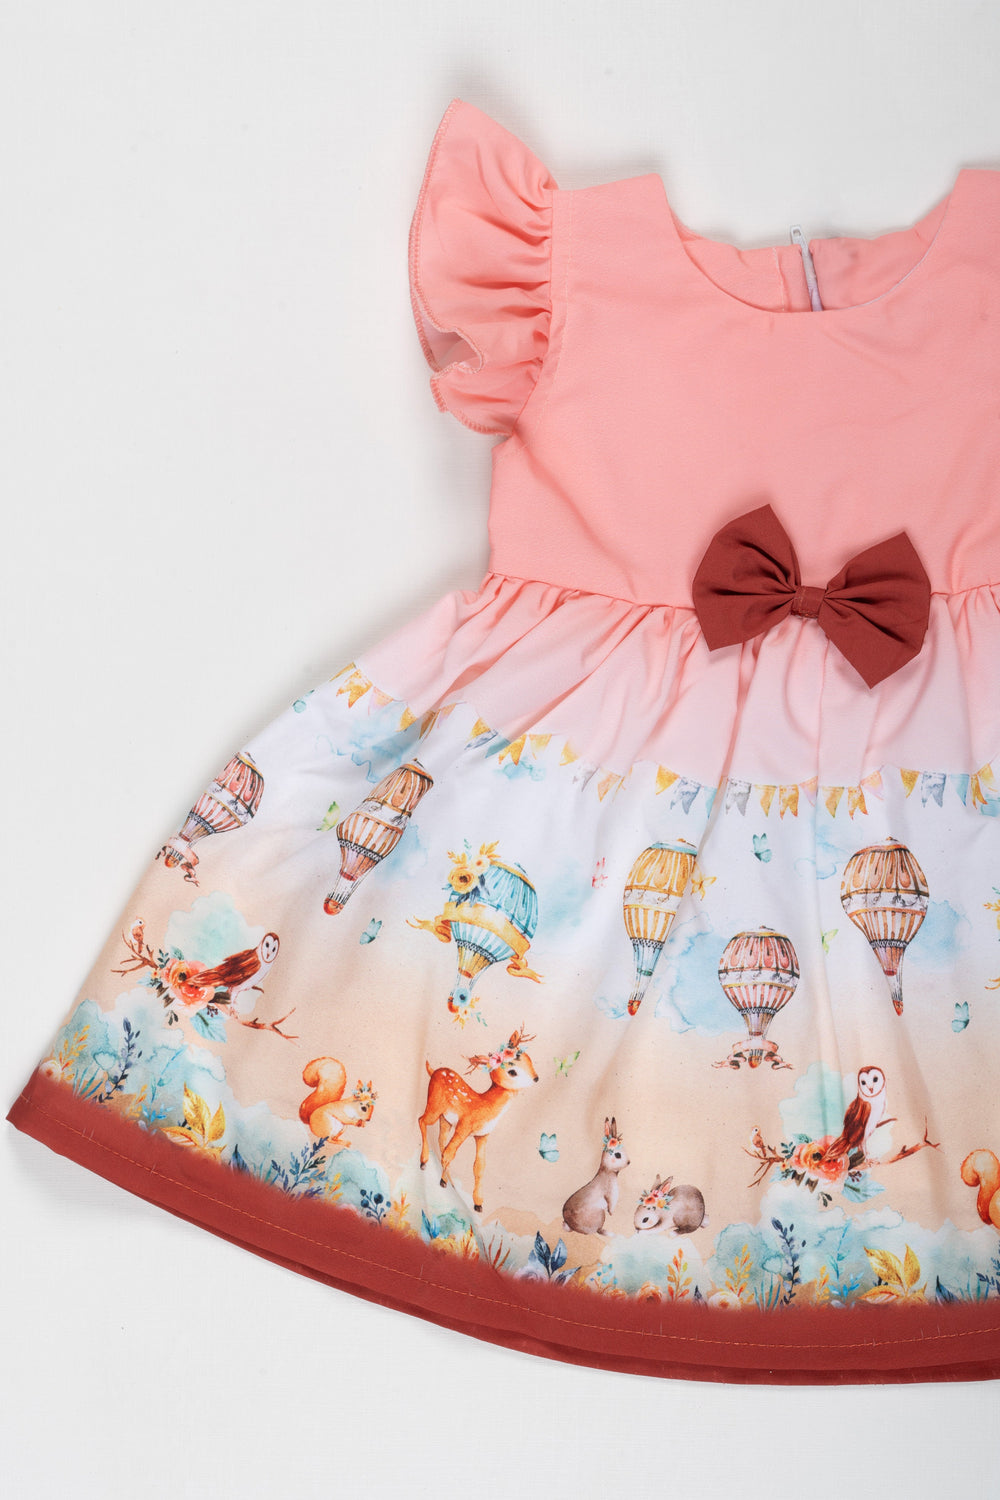 The Nesavu Baby Fancy Frock Enchanted Forest Adventure Baby Girl Frock with Hot Air Balloon Imagery Nesavu Discover the Magic of Storytime with Our Woodland Balloon Baby Frock | The Nesavu